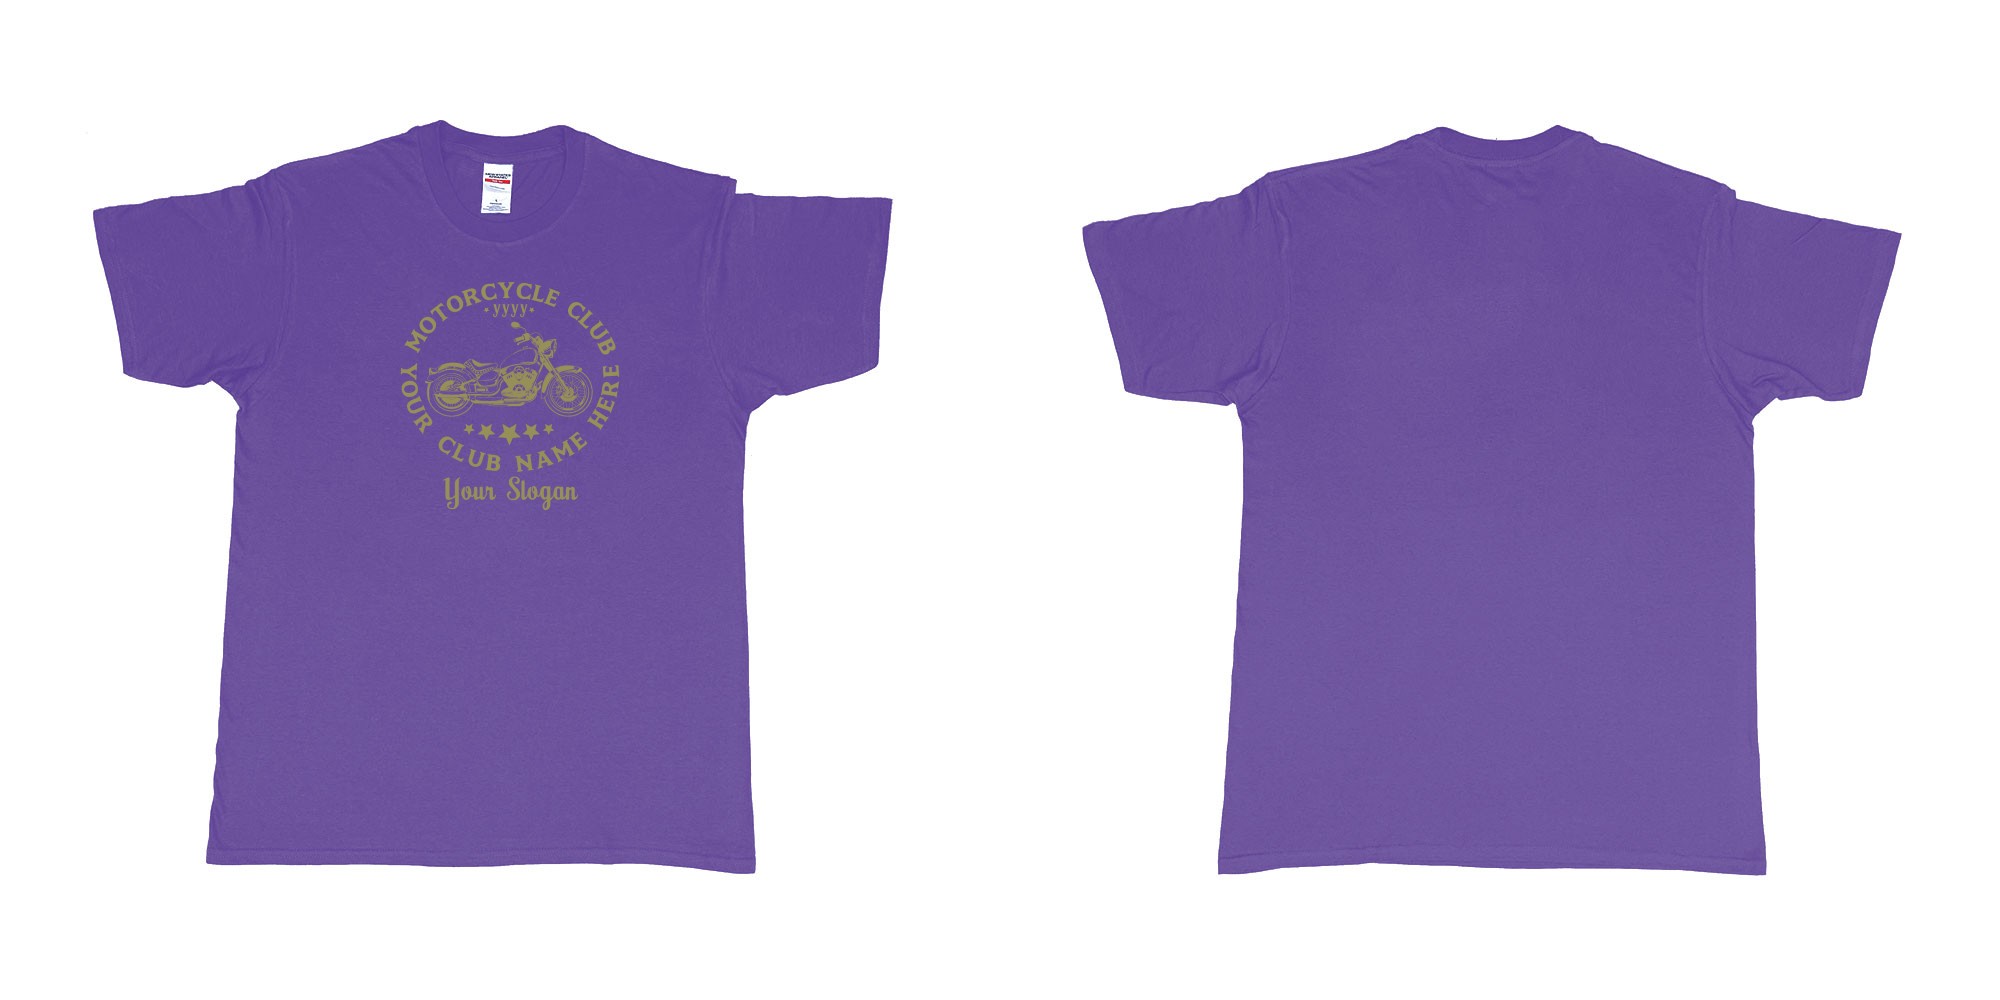 Custom tshirt design old bike motor bike club in fabric color purple choice your own text made in Bali by The Pirate Way